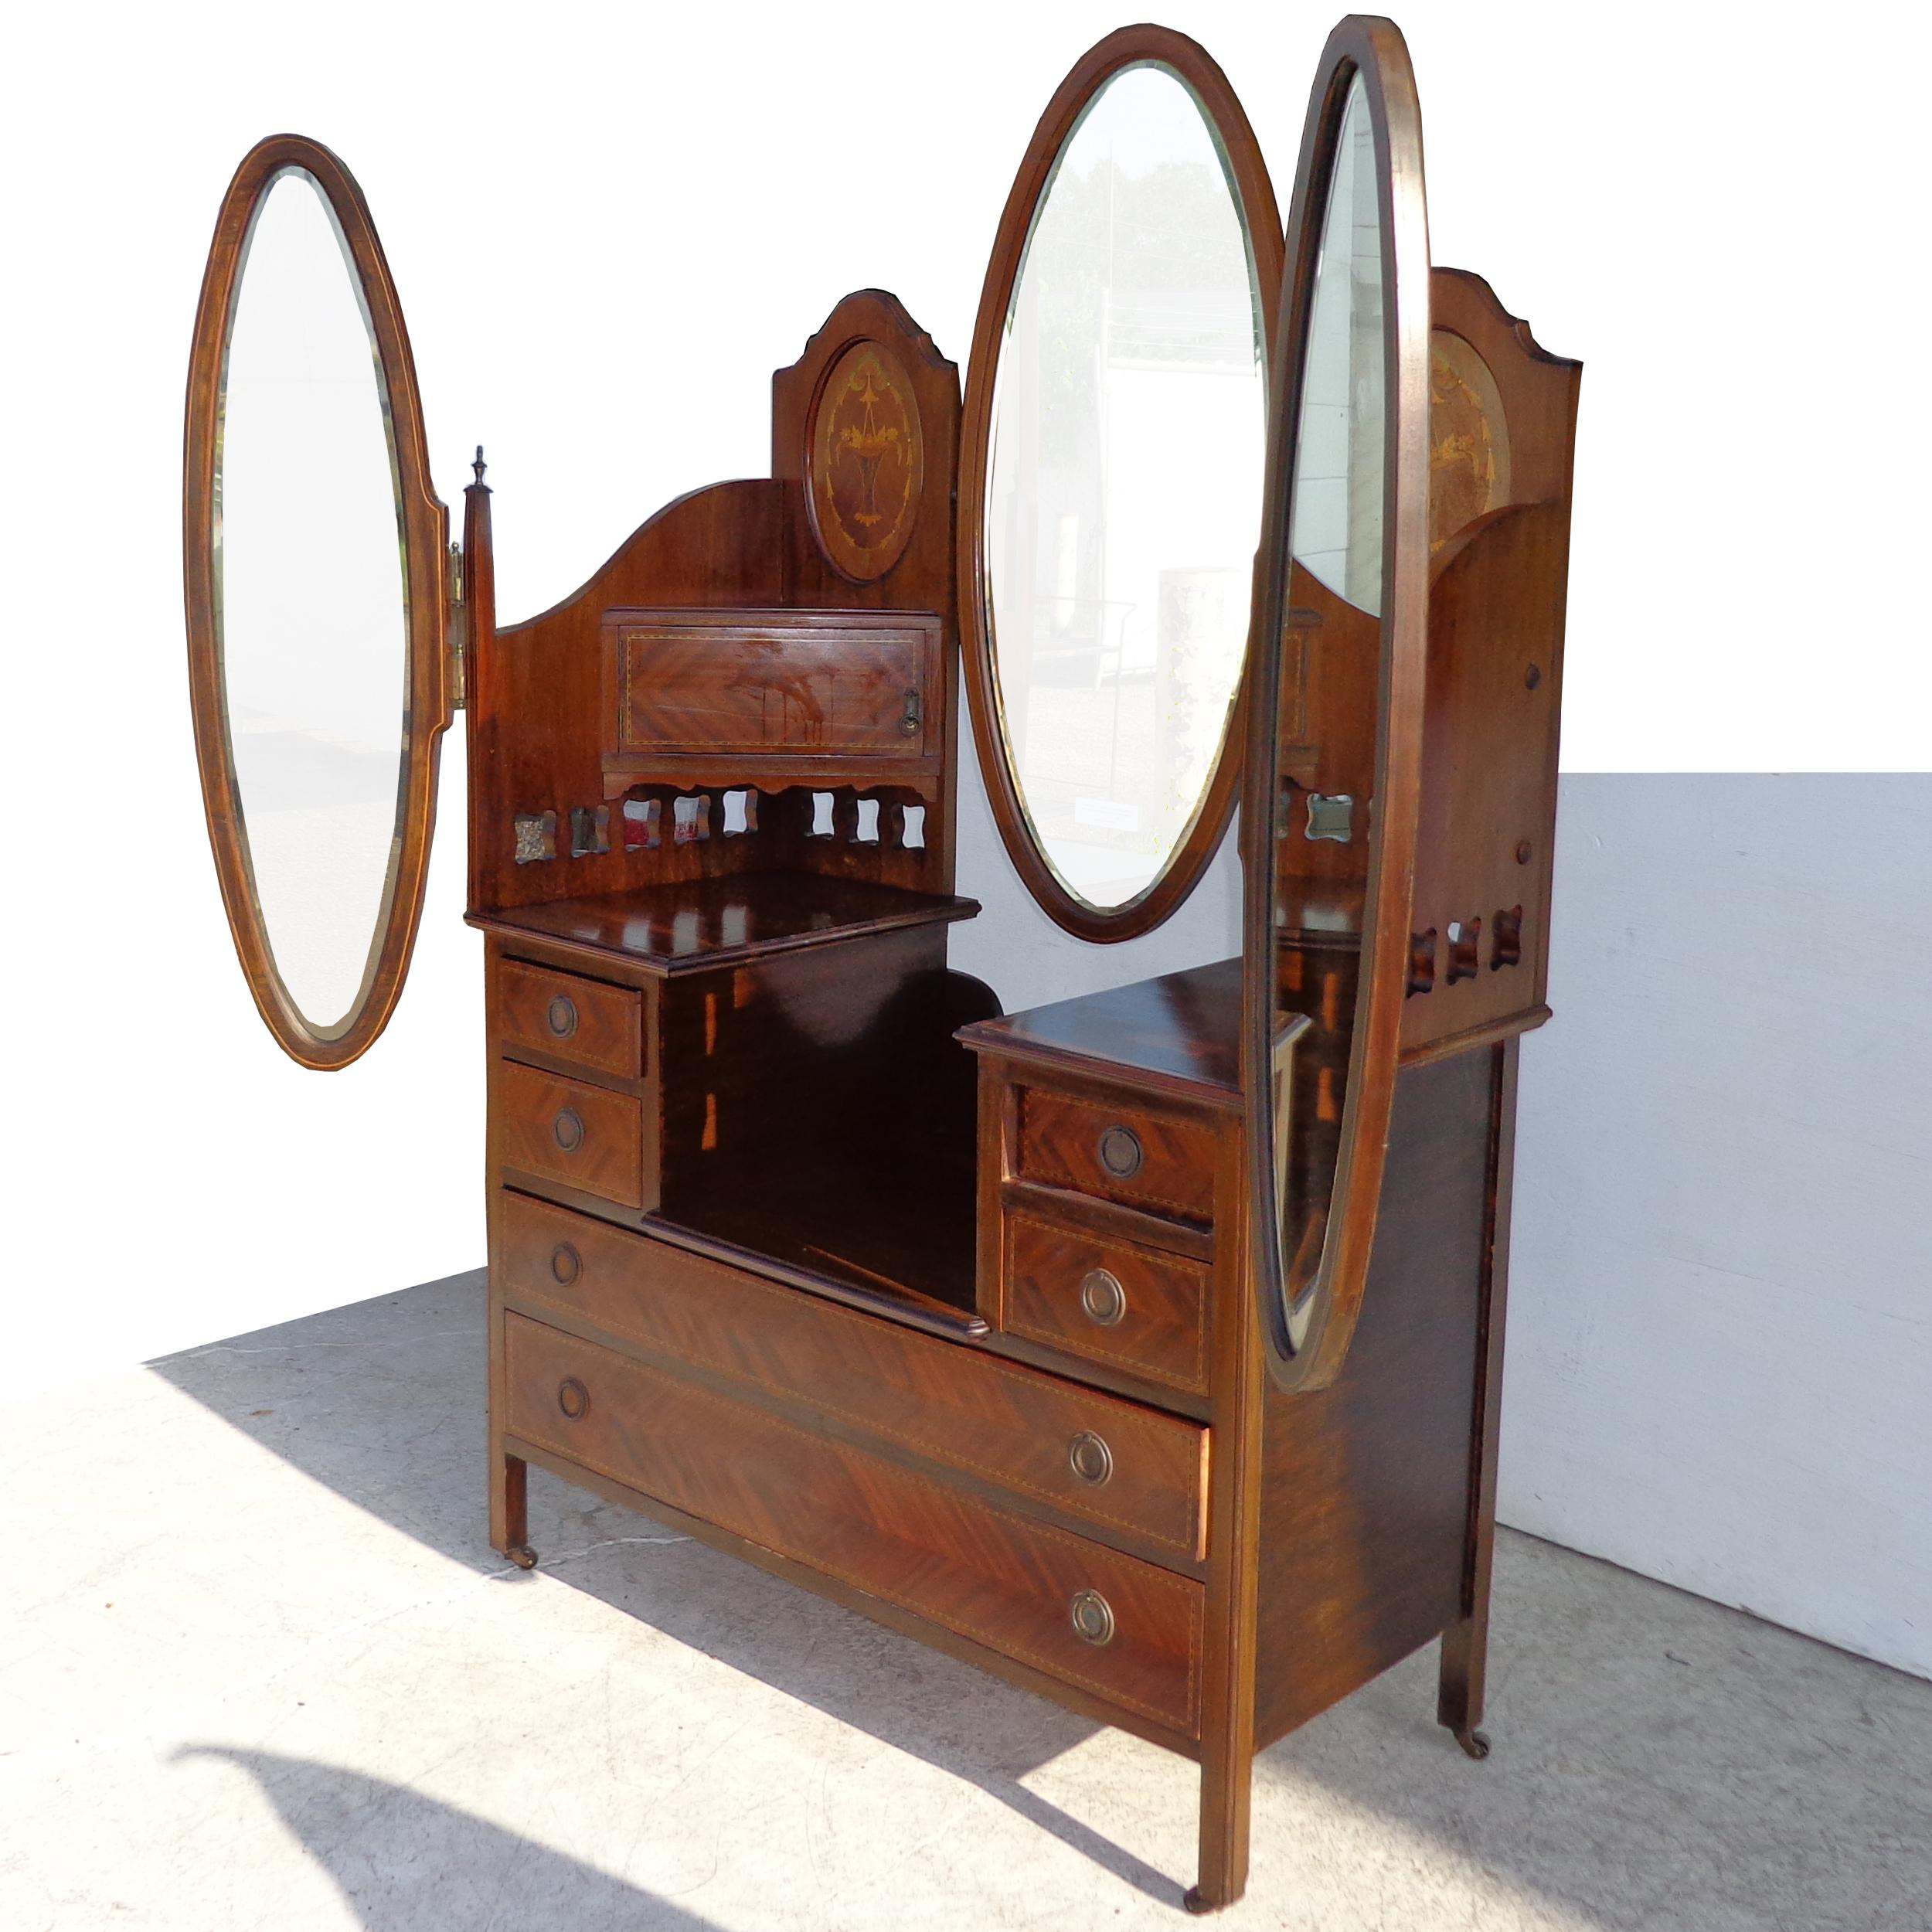 Mahogany triple mirror vanity with adjustable mirrors
1900s

This stunning vanity has a raised back with burled and parquetry oval panels. One center oval mirror flanked by 2 adjustable mirrors on each side.
Two concealed corner jewelry drawers